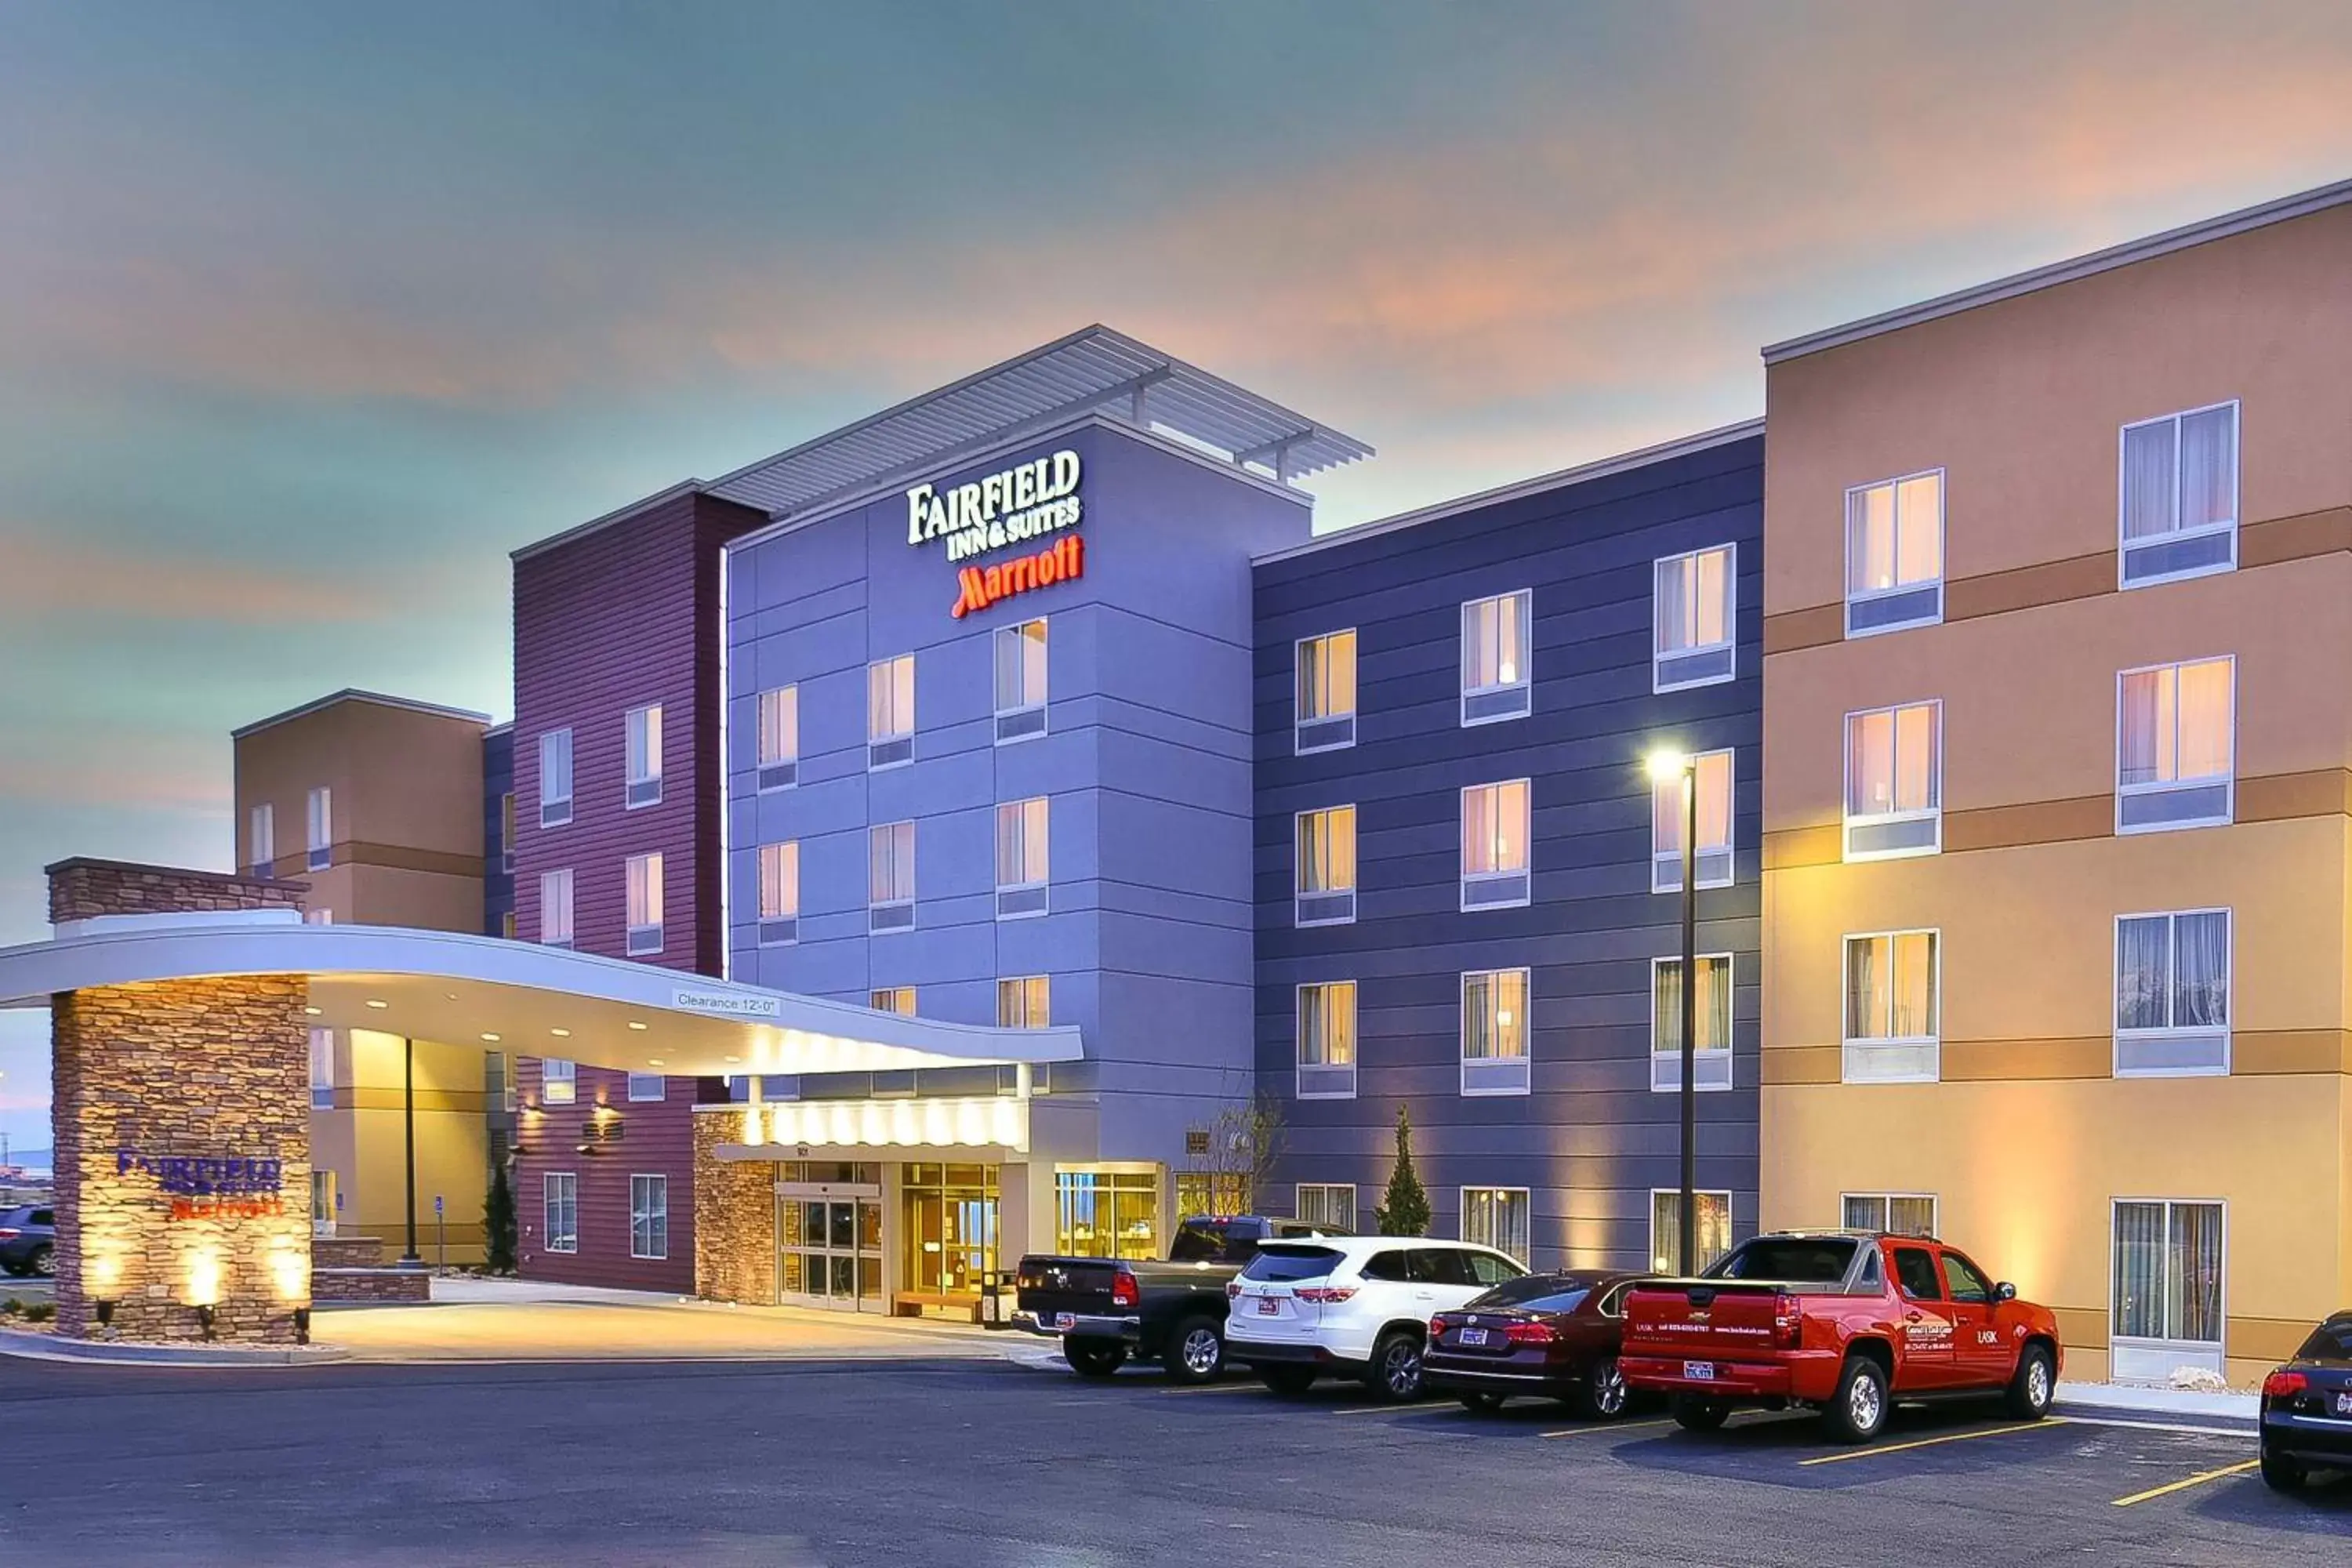 Property Building in Fairfield Inn & Suites by Marriott Provo Orem